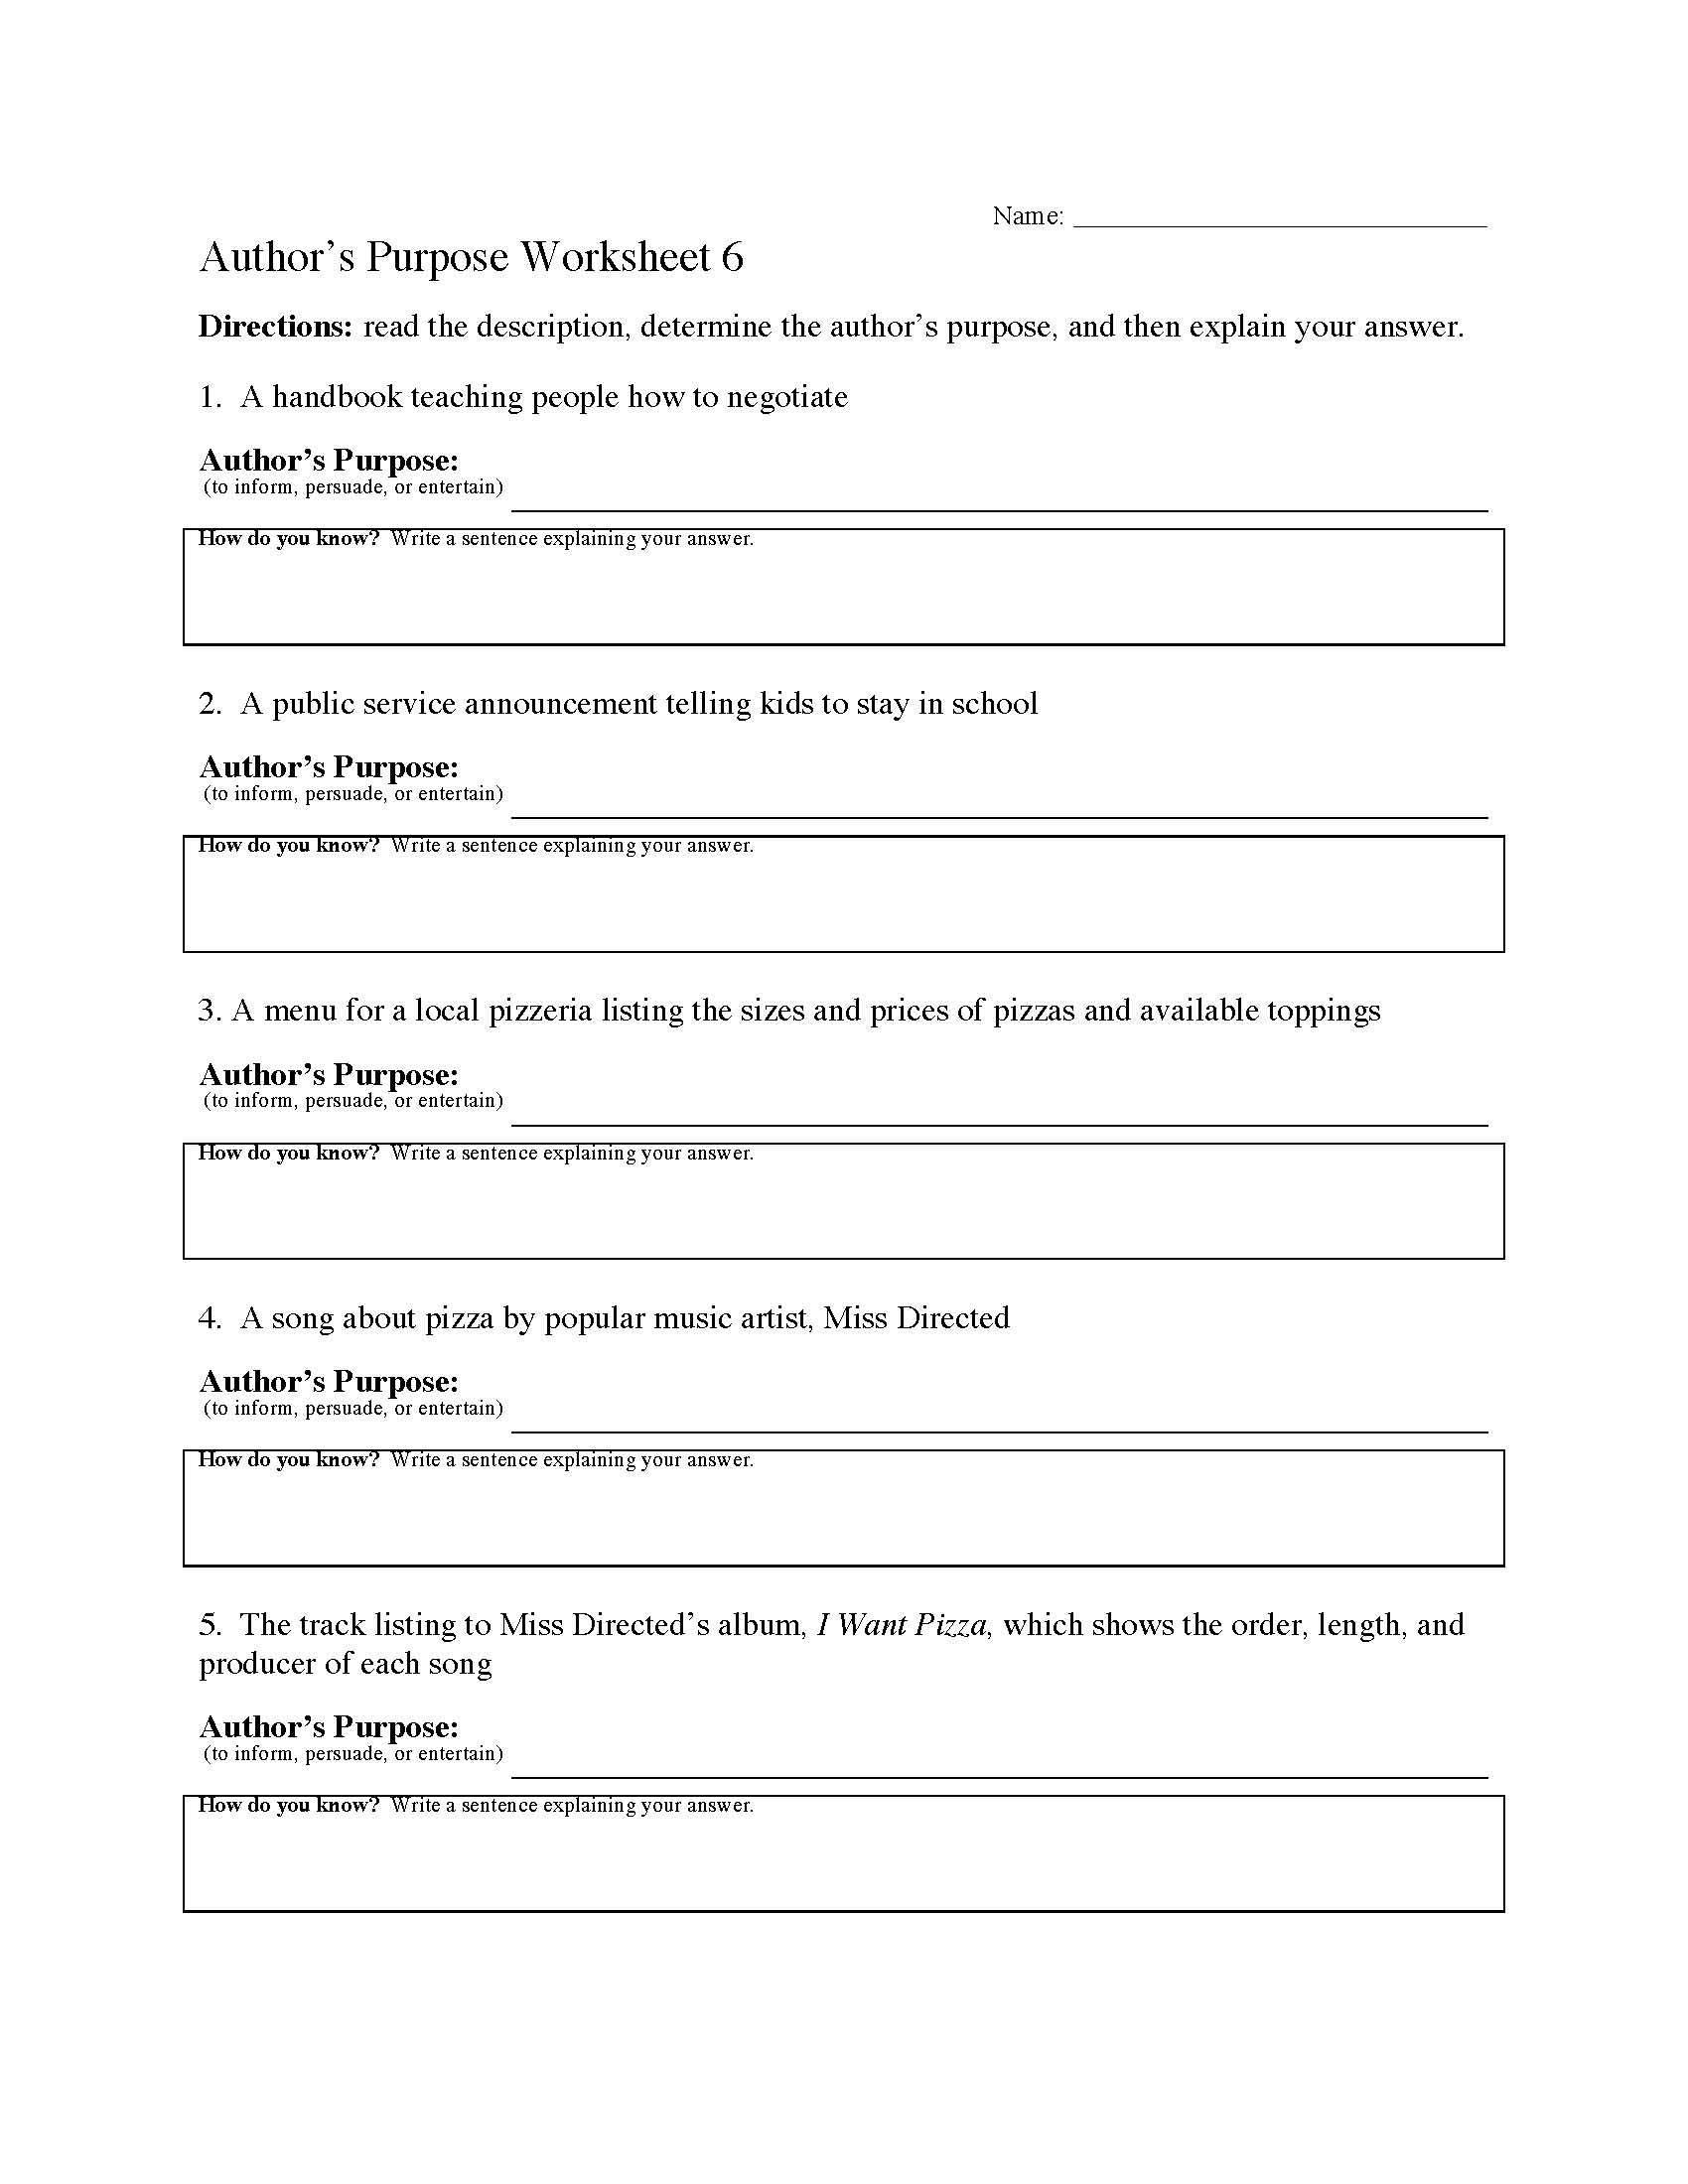 This is a preview image of Author's Purpose Worksheet 6. Click on it to enlarge it or view the source file.